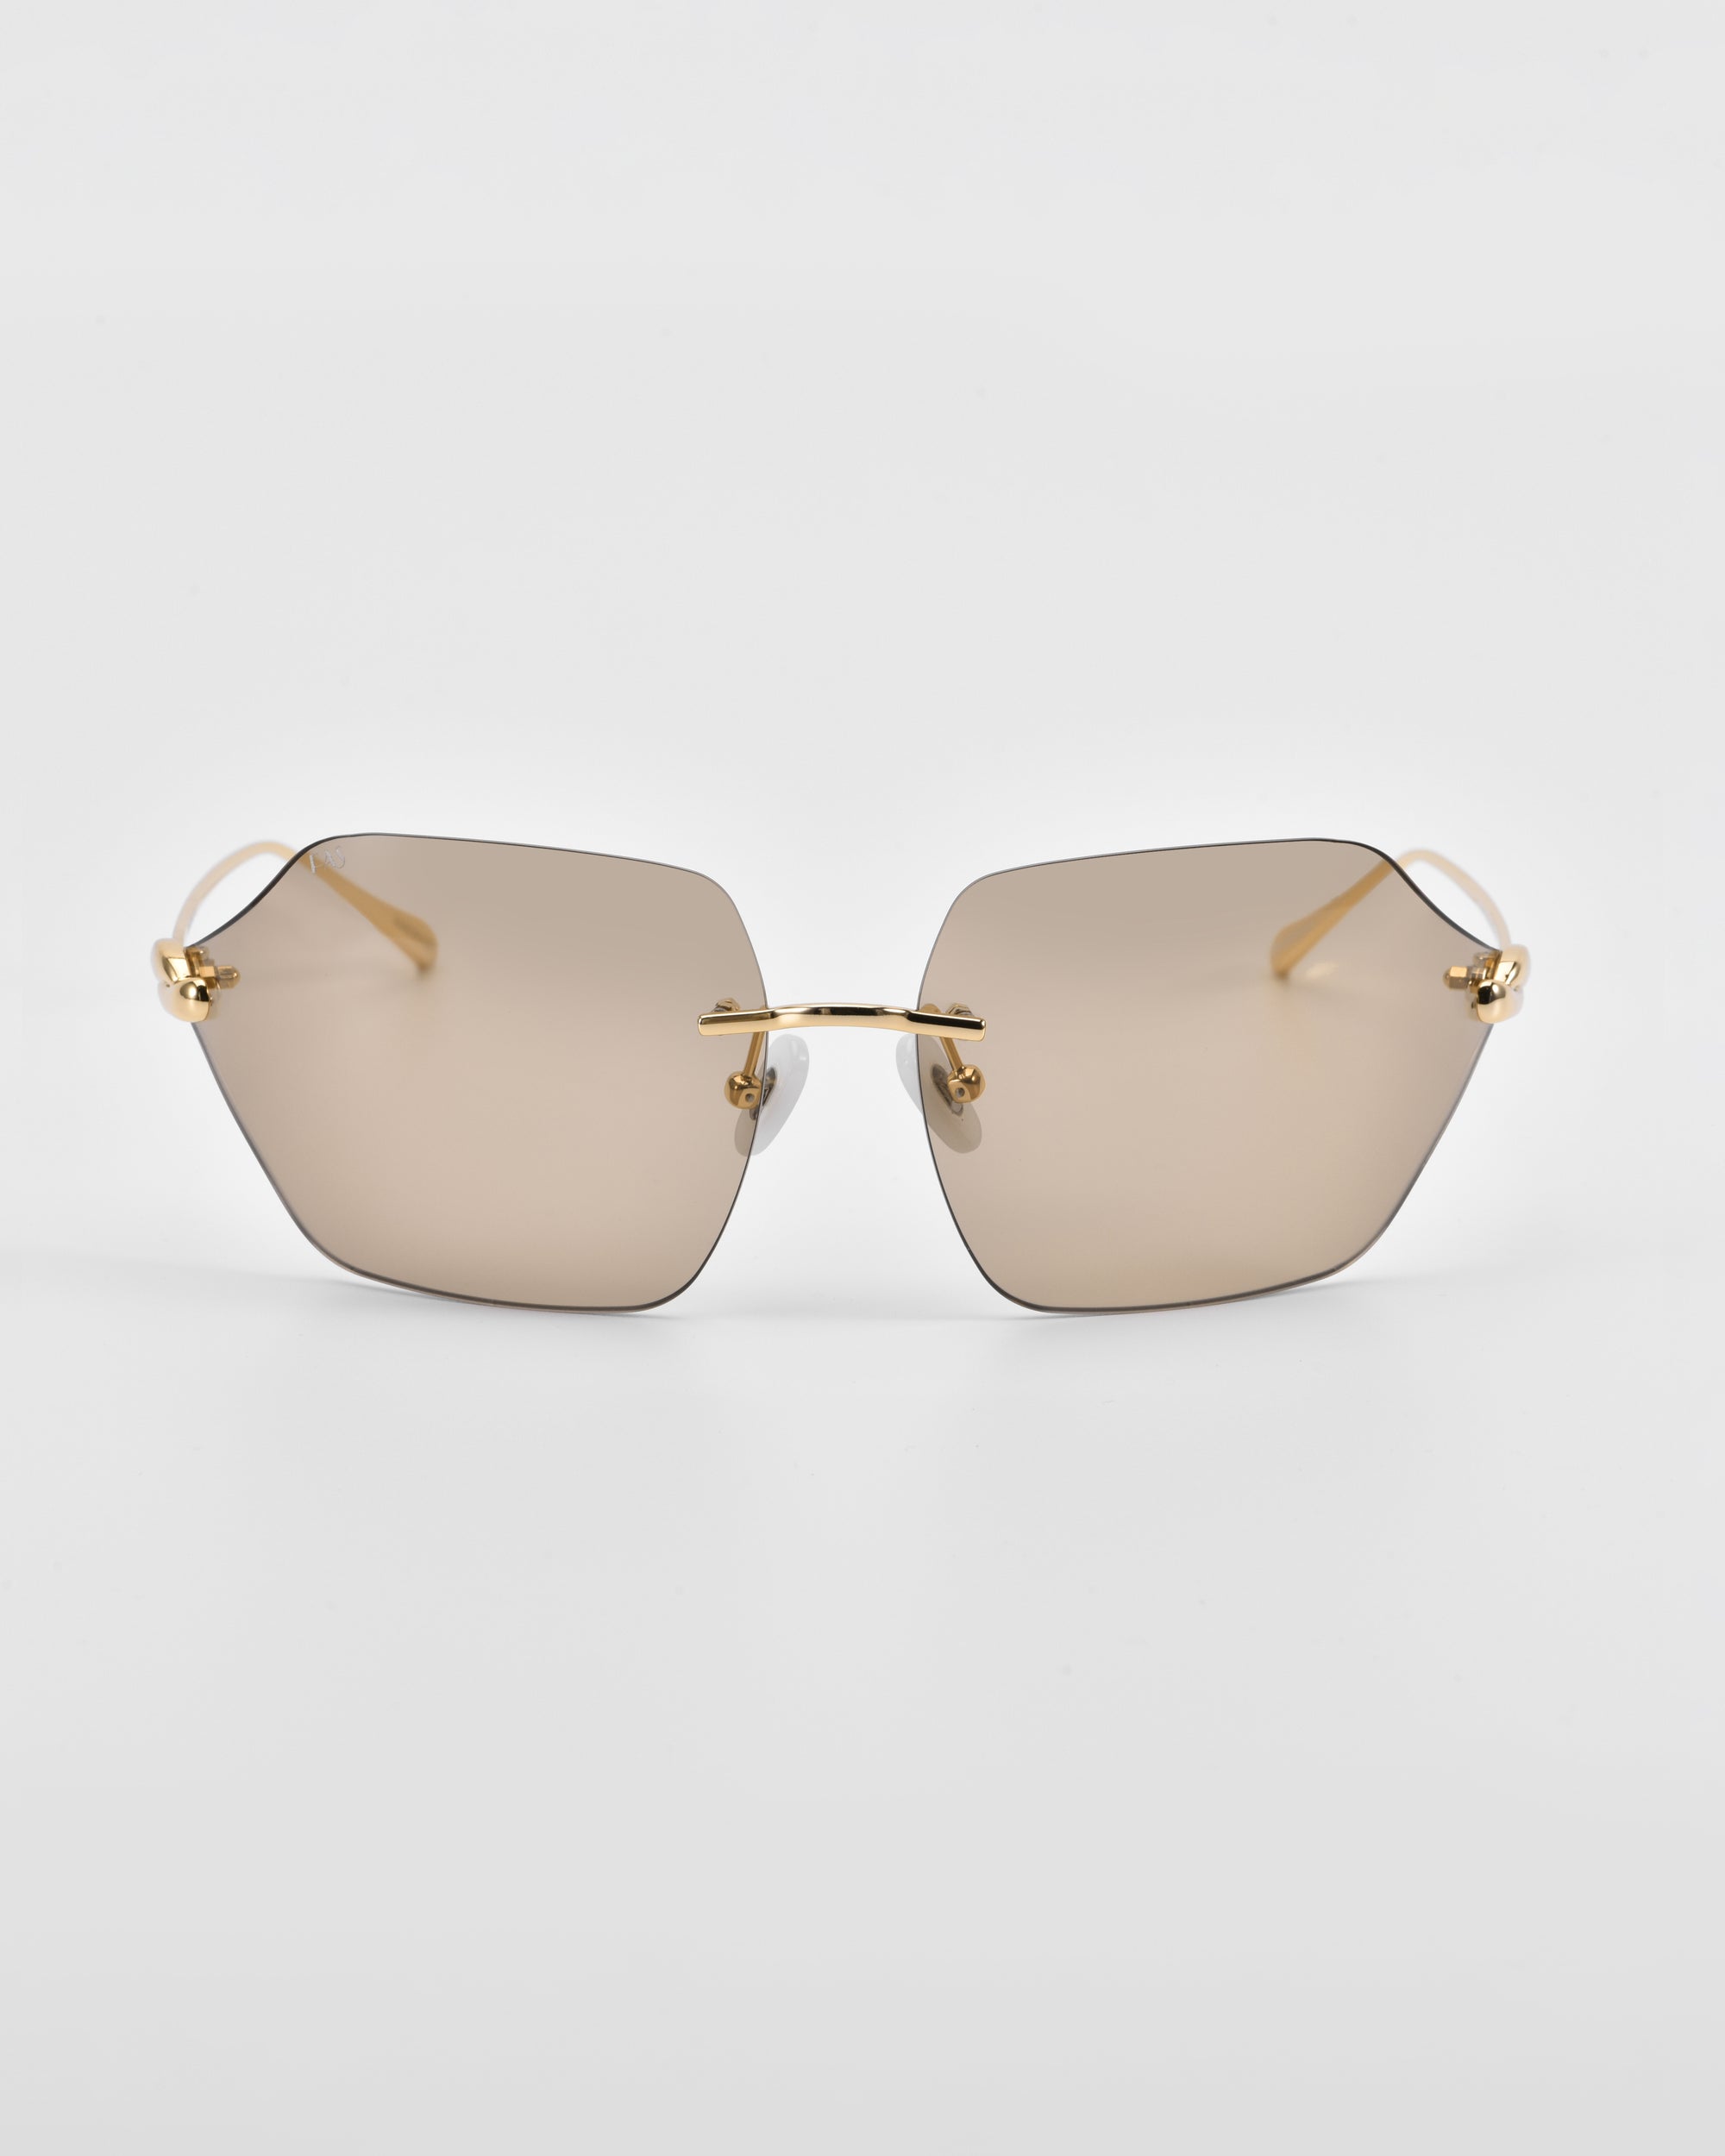 A pair of stylish Serpent II sunglasses from For Art's Sake® features a frameless wrap lens design with slightly tinted, polygonal lenses and thin, golden arms. Displayed against a plain white background, the nose bridge also boasts 18-karat gold plating, accentuating the modern design of the eyewear.